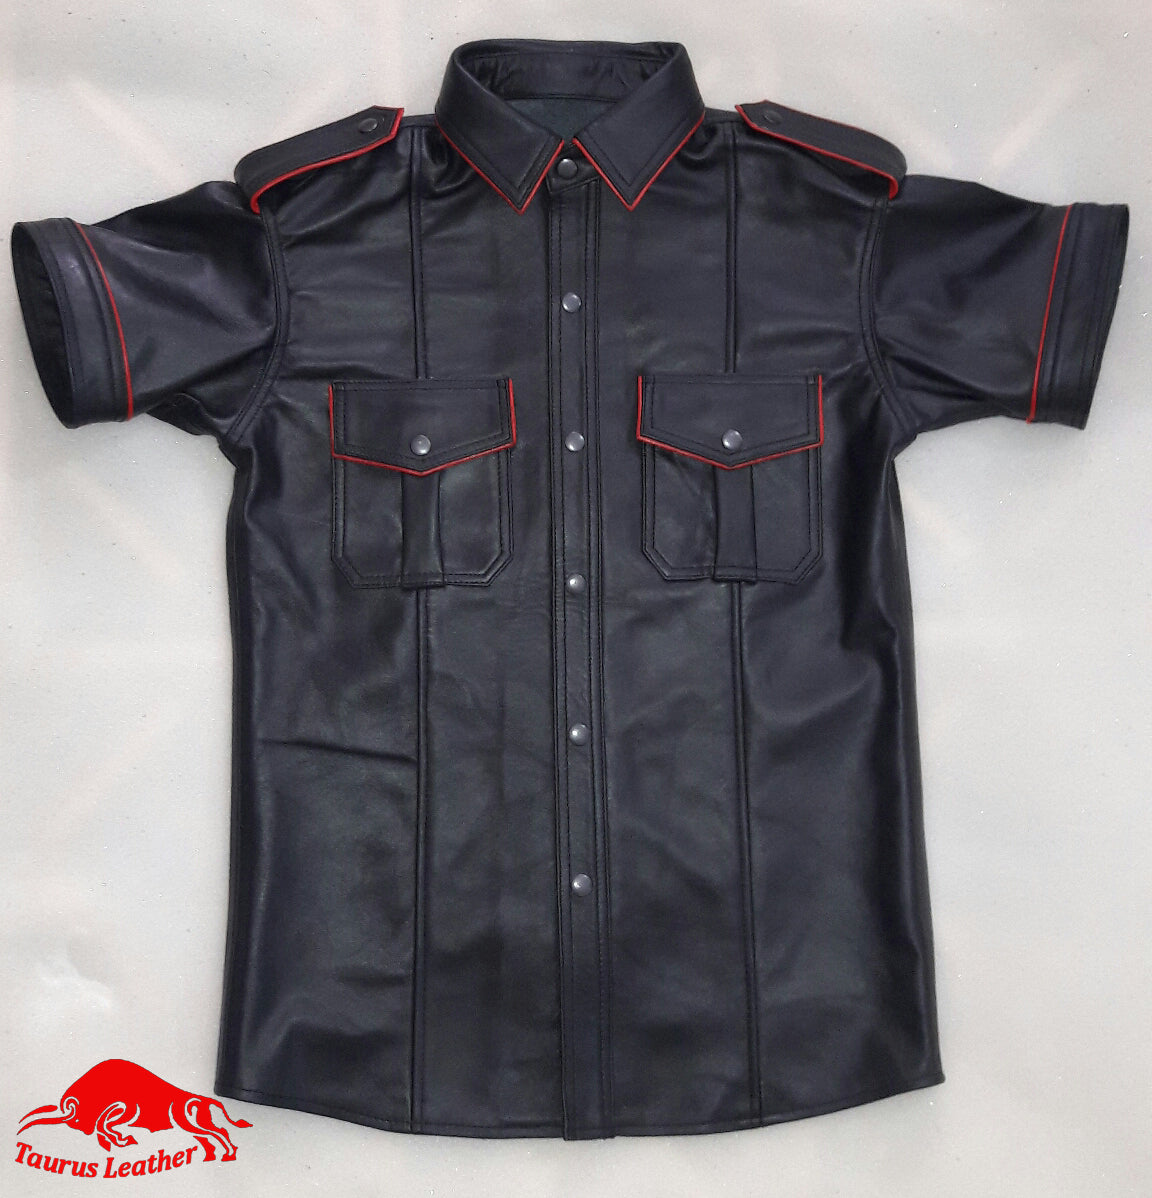 TAURUS LEATHER Black Sheep Leather Shirt With Red Trimming